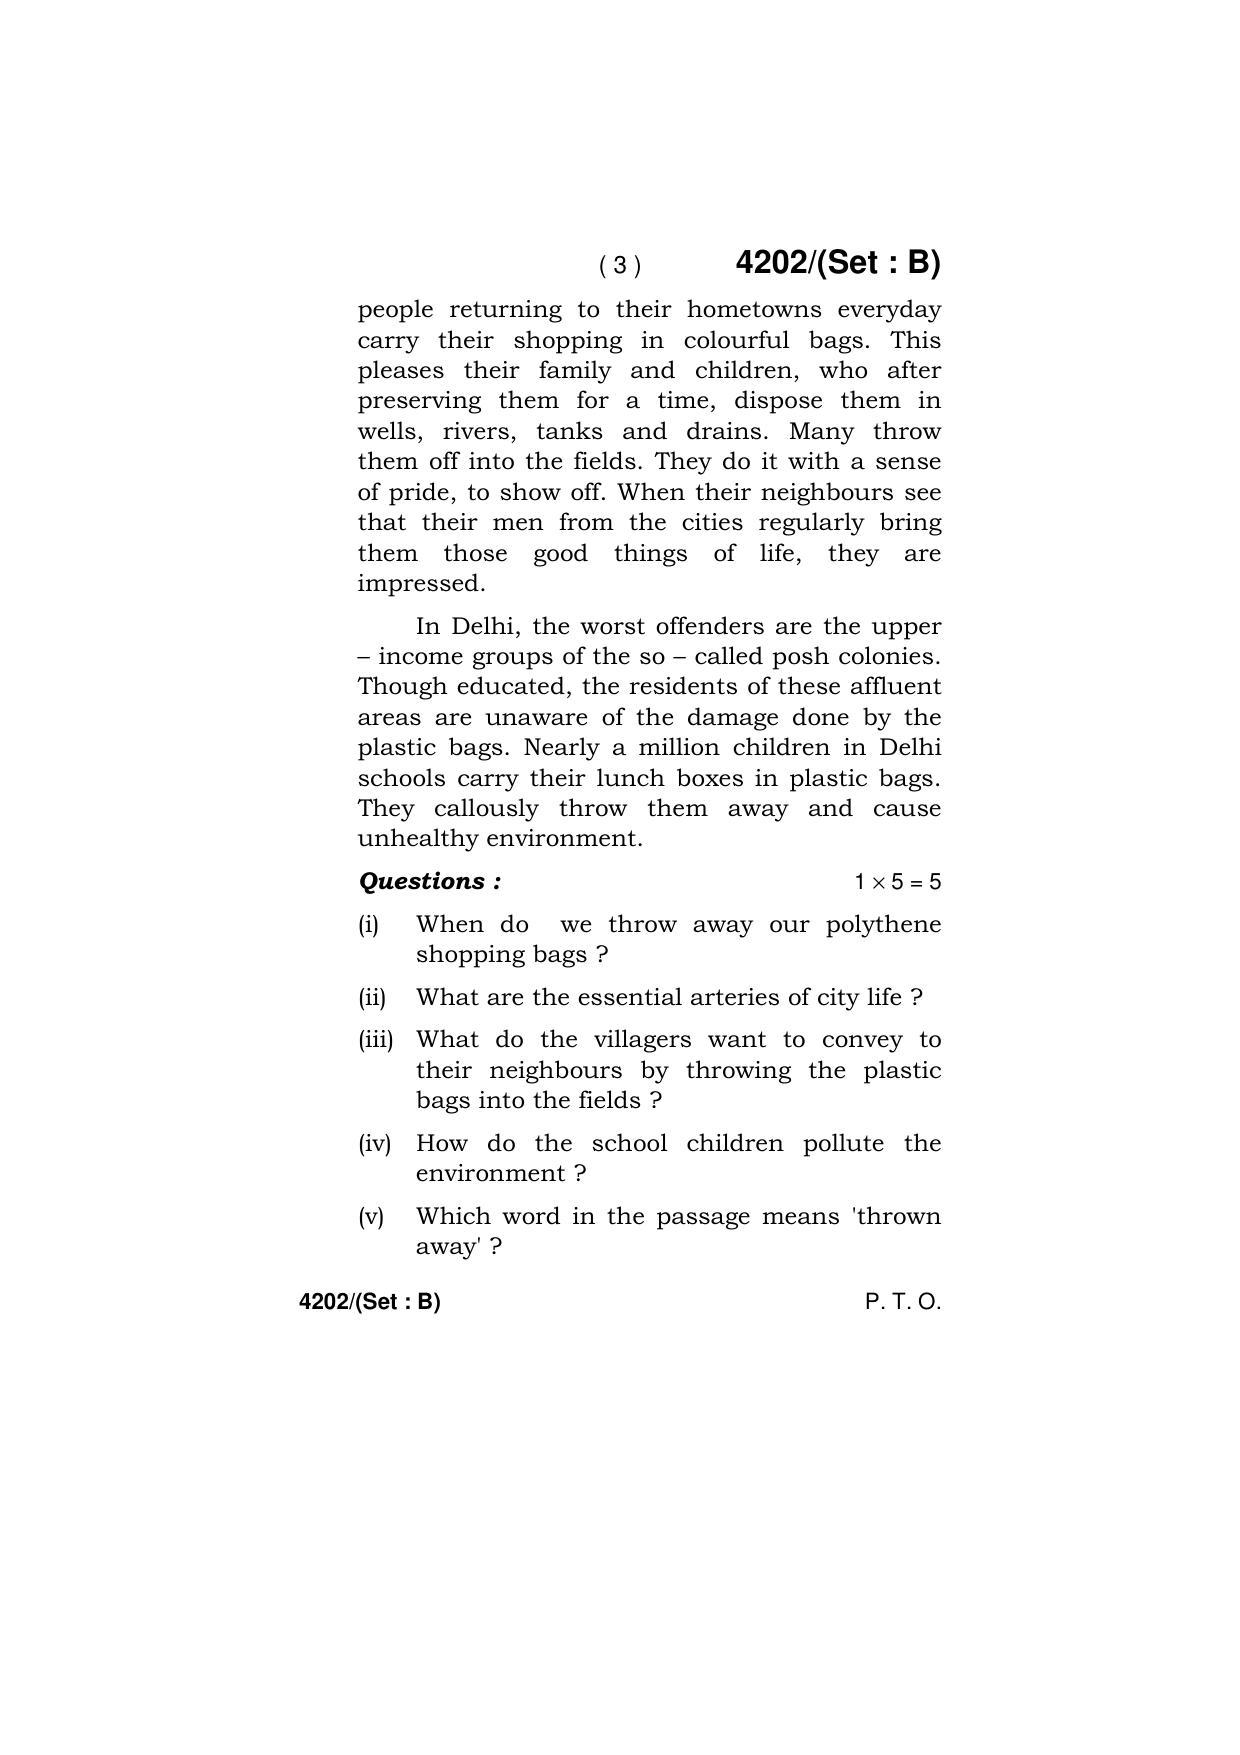 Haryana Board HBSE Class 10 English (All Set) 2019 Question Paper - Page 19